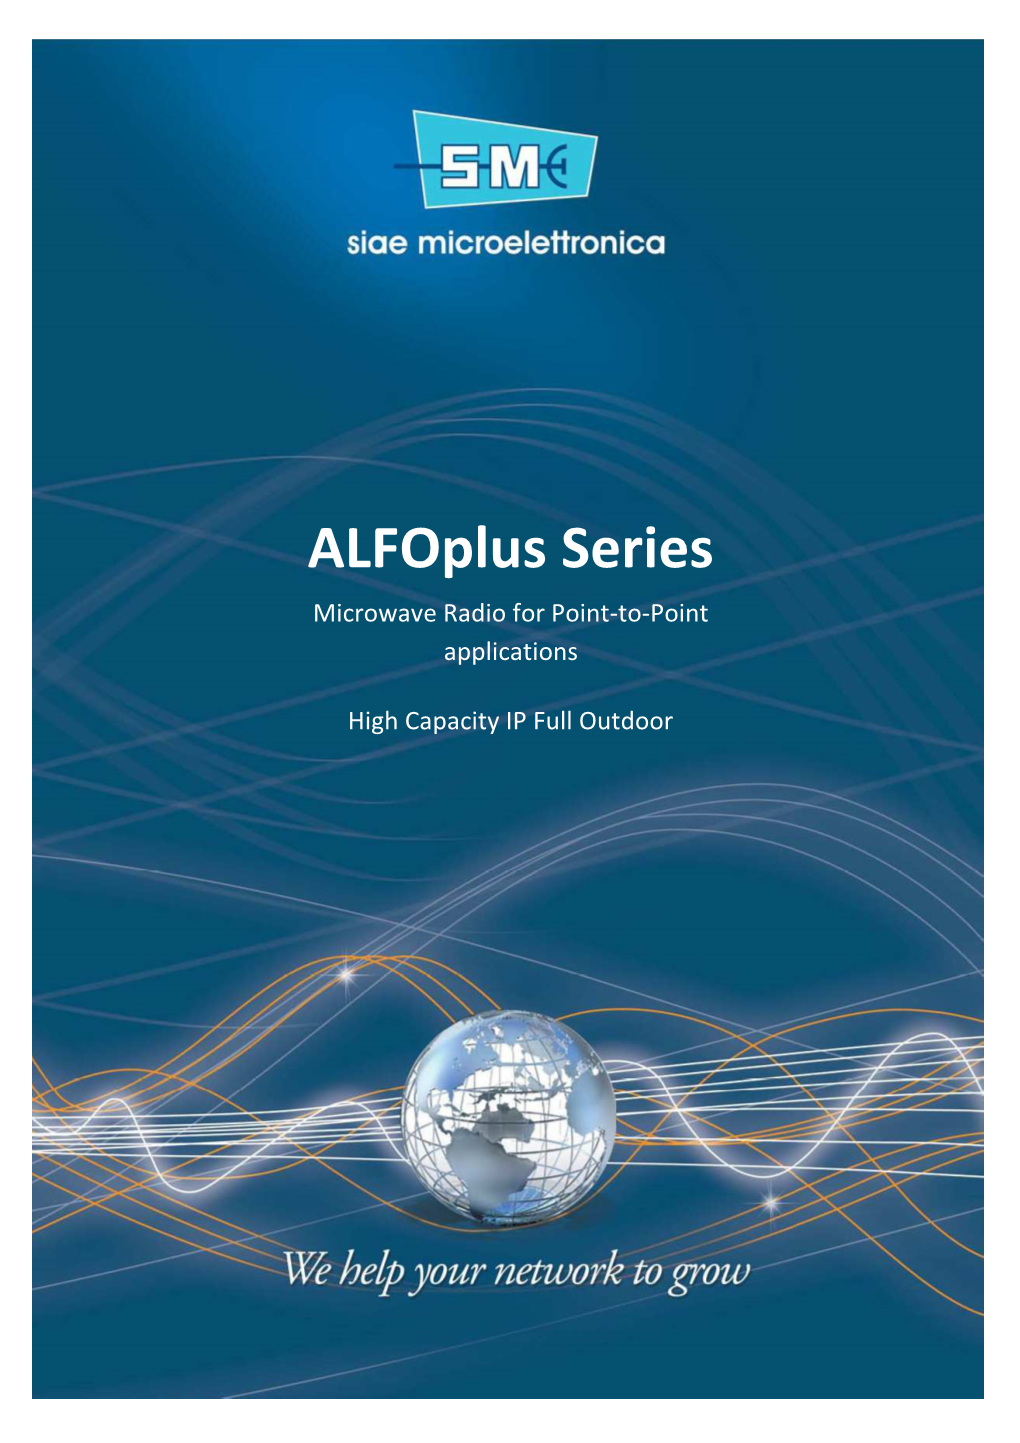 Alfoplus Series Microwave Radio for Point-To-Point Applications